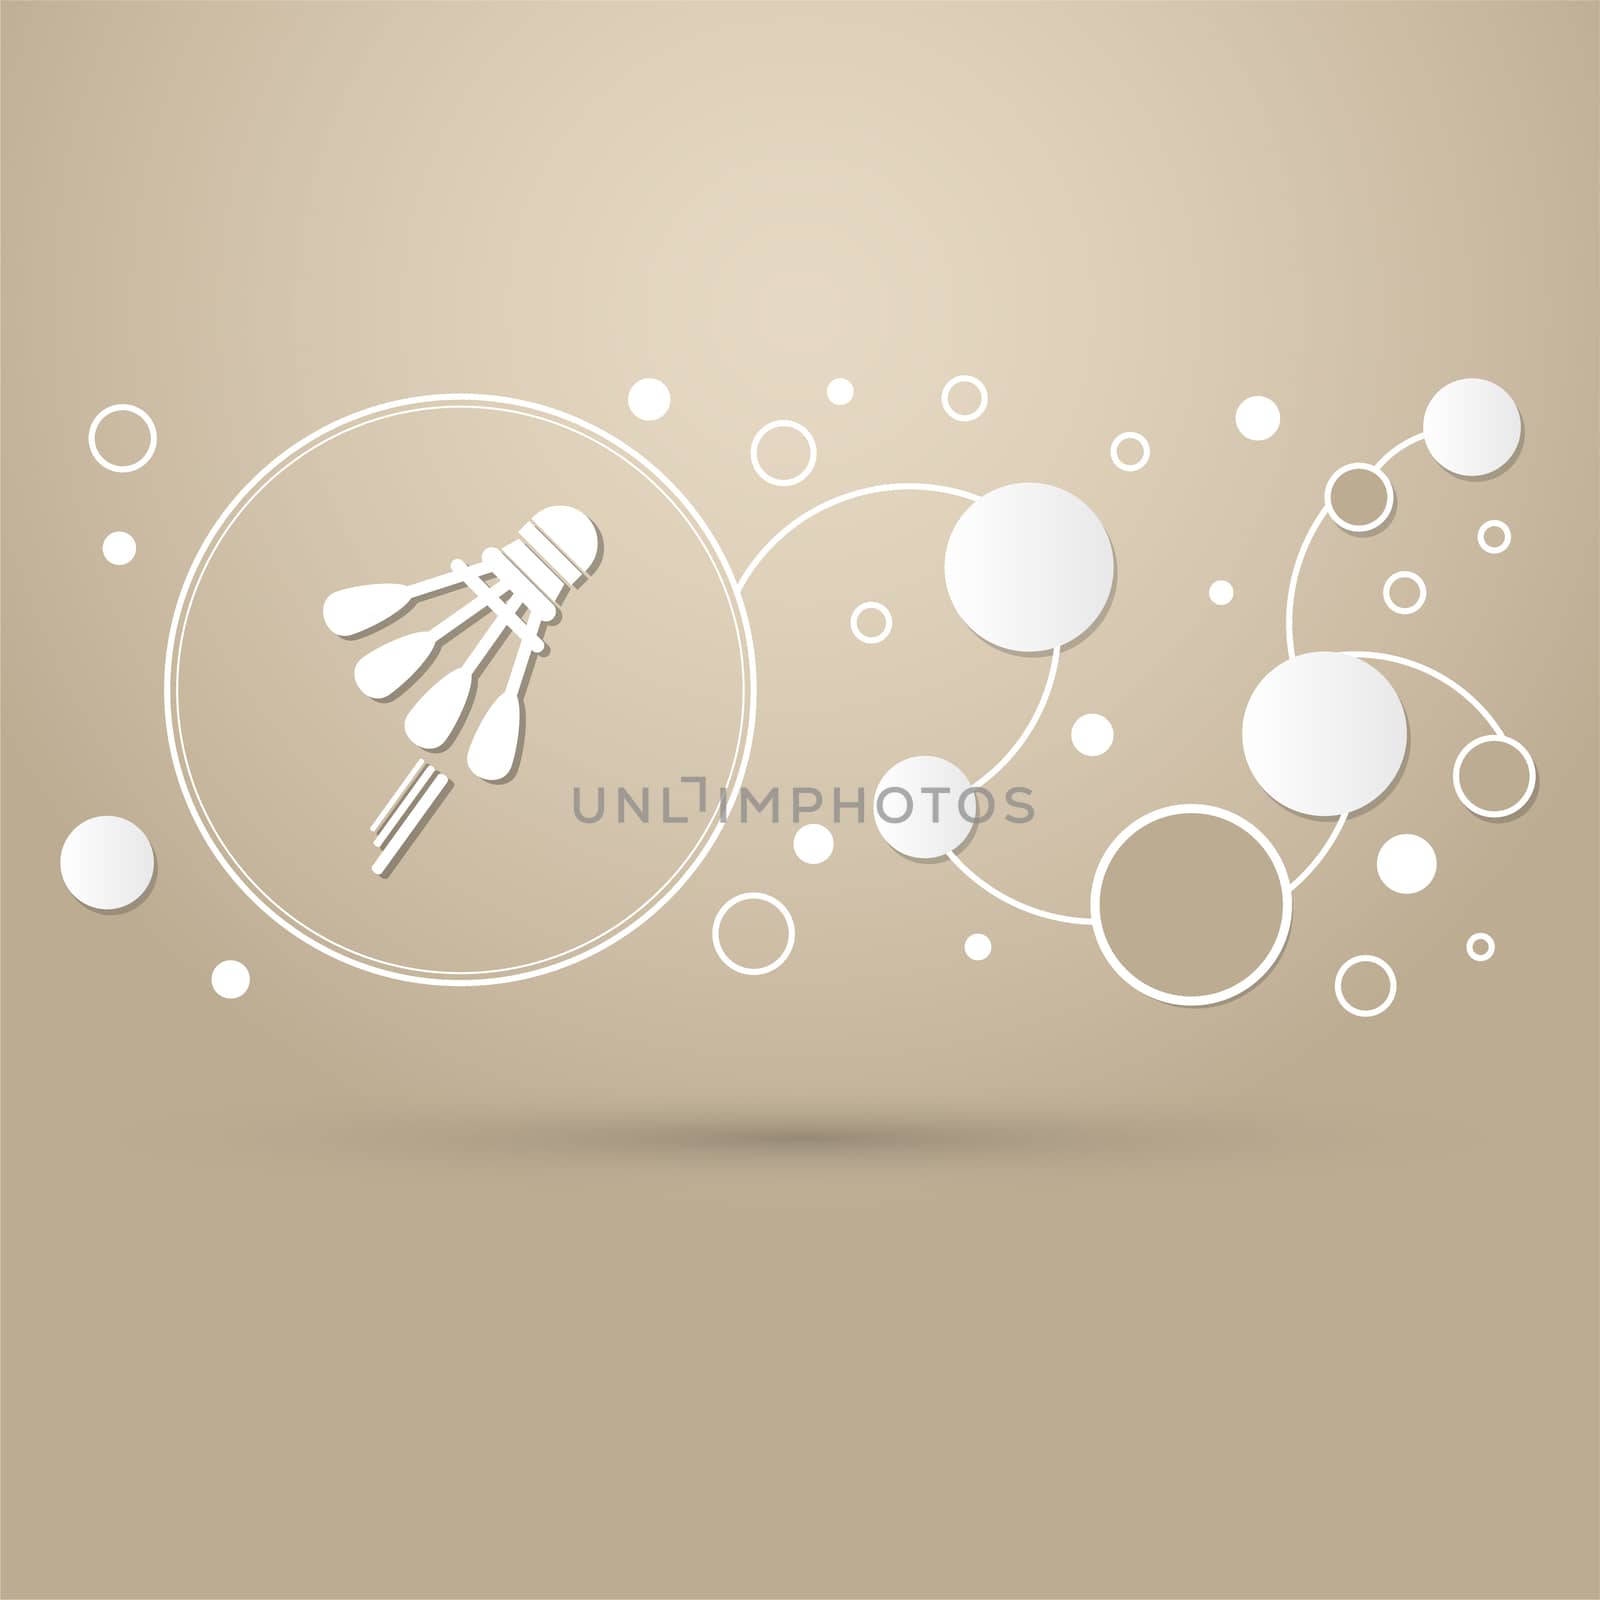 Shuttlecock, badminton, tennis icon on a brown background with elegant style and modern design infographic.  by Adamchuk